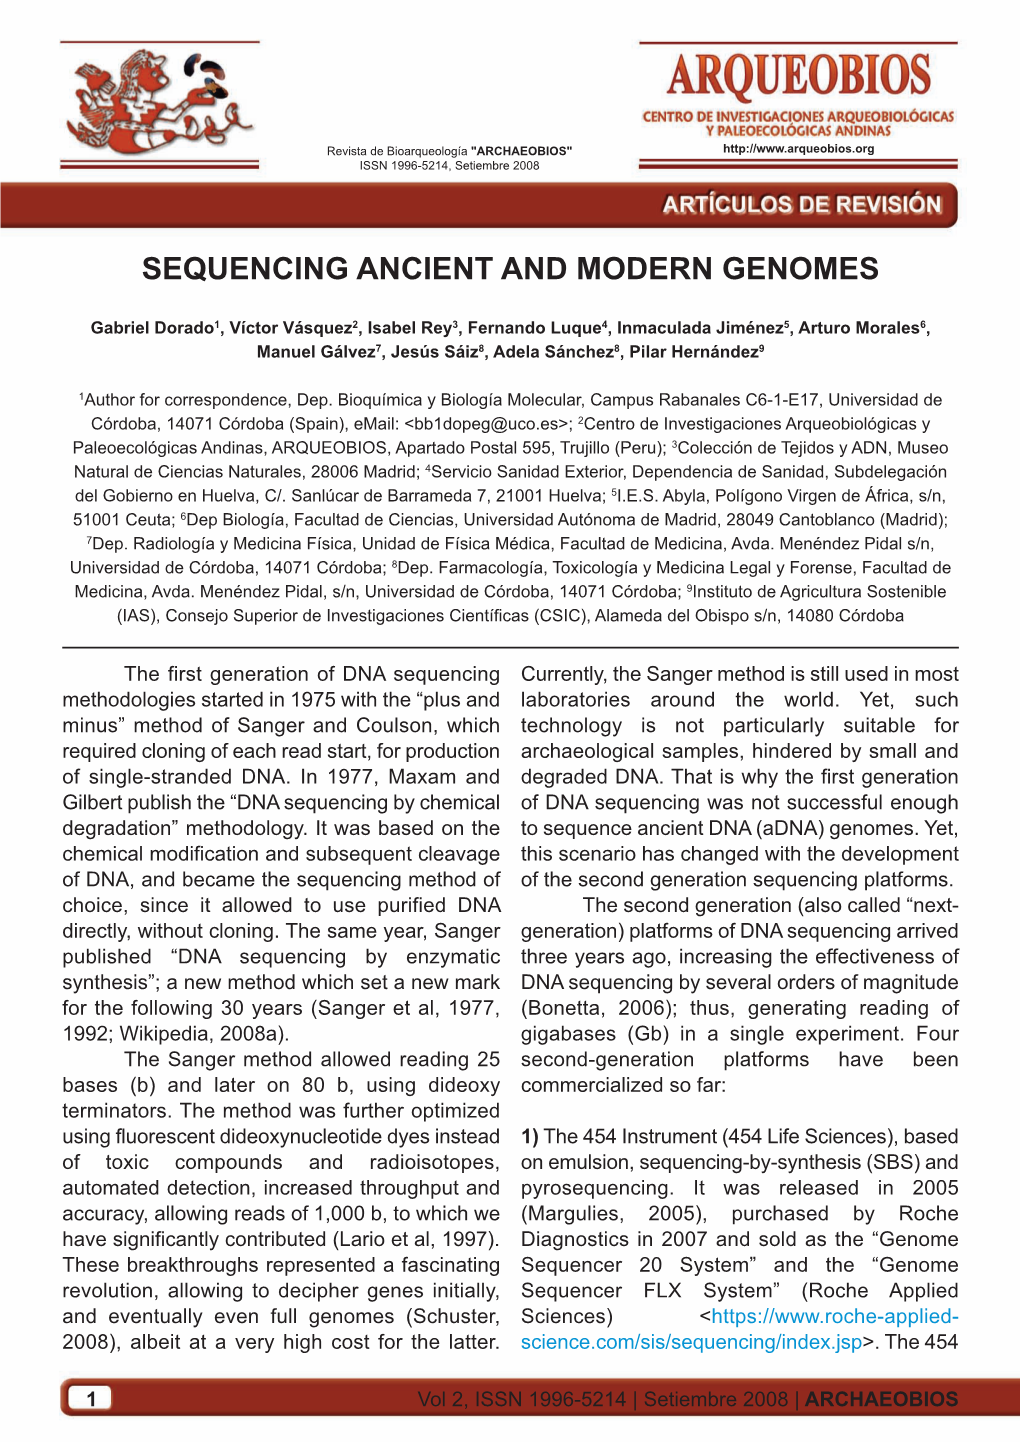 Sequencing Ancient and Modern Genomes